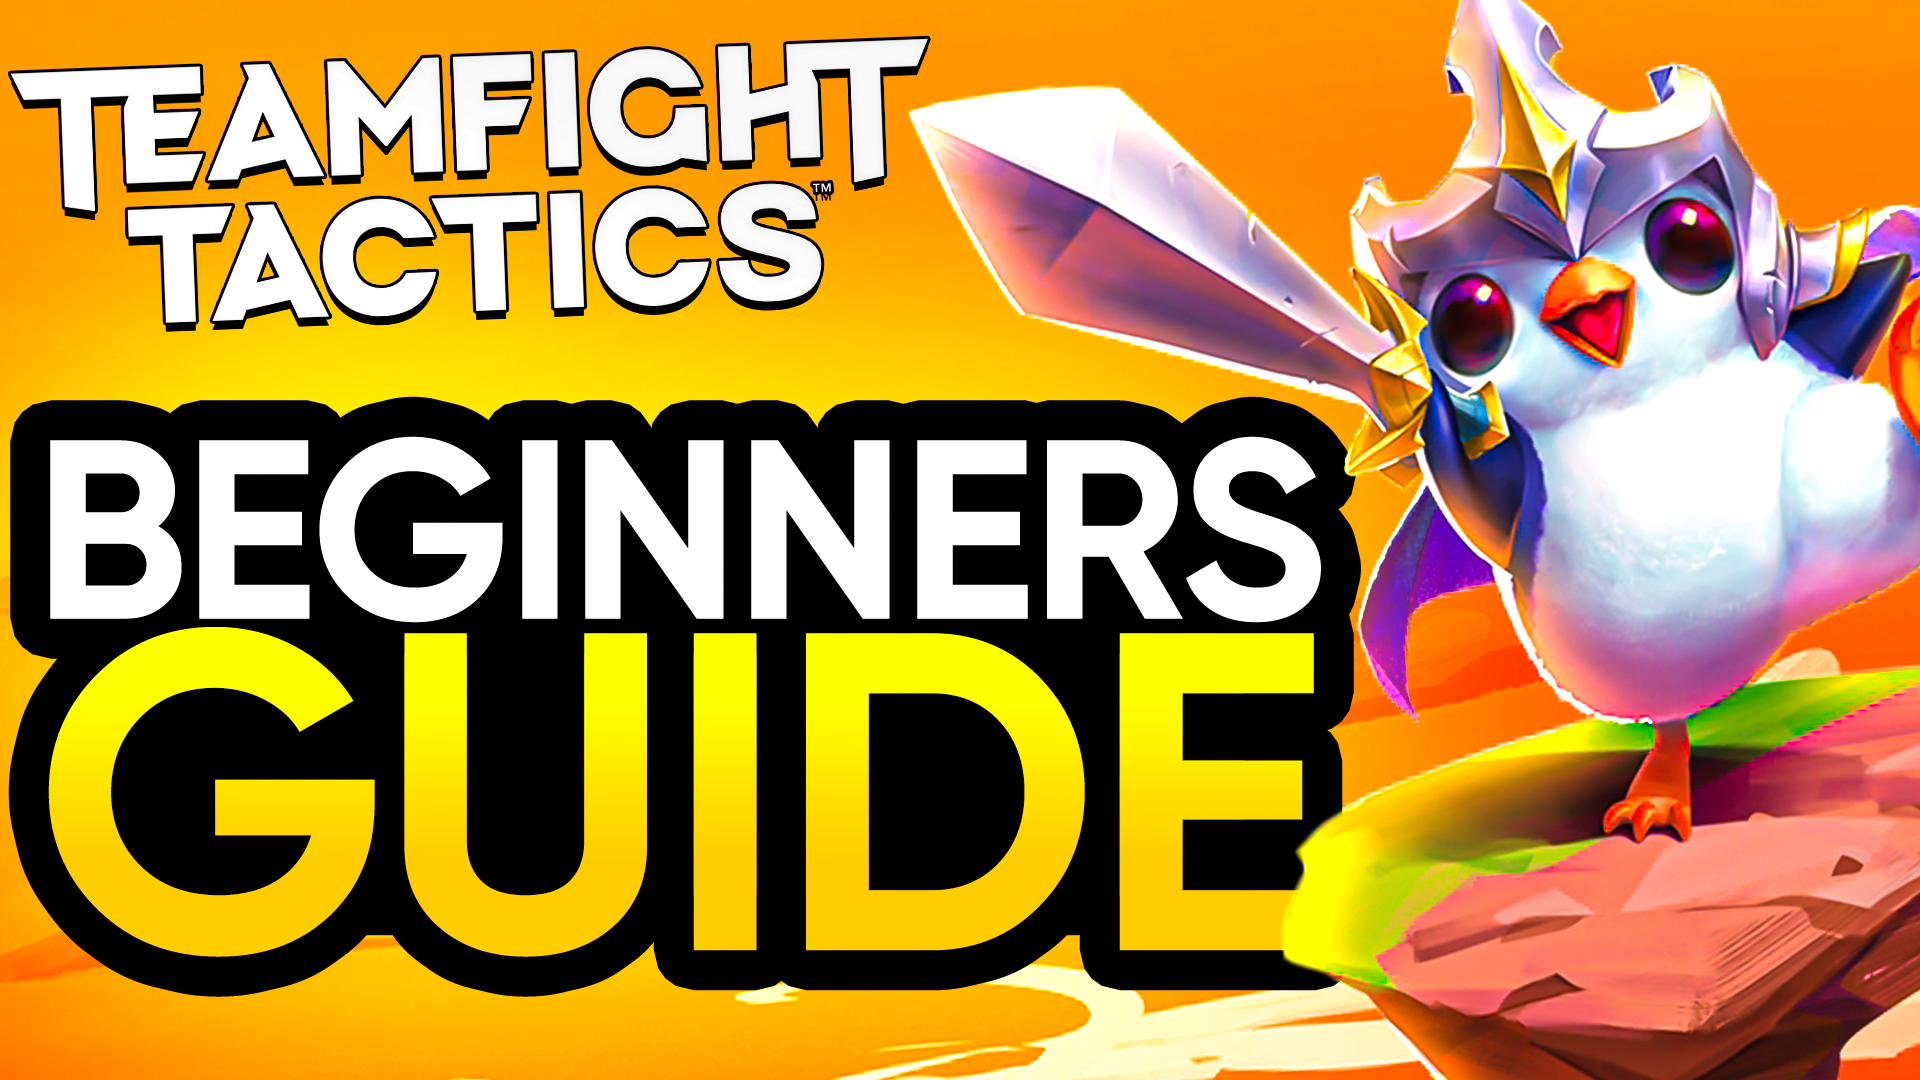 New Player Guide for Teamfight Tactics Set 5